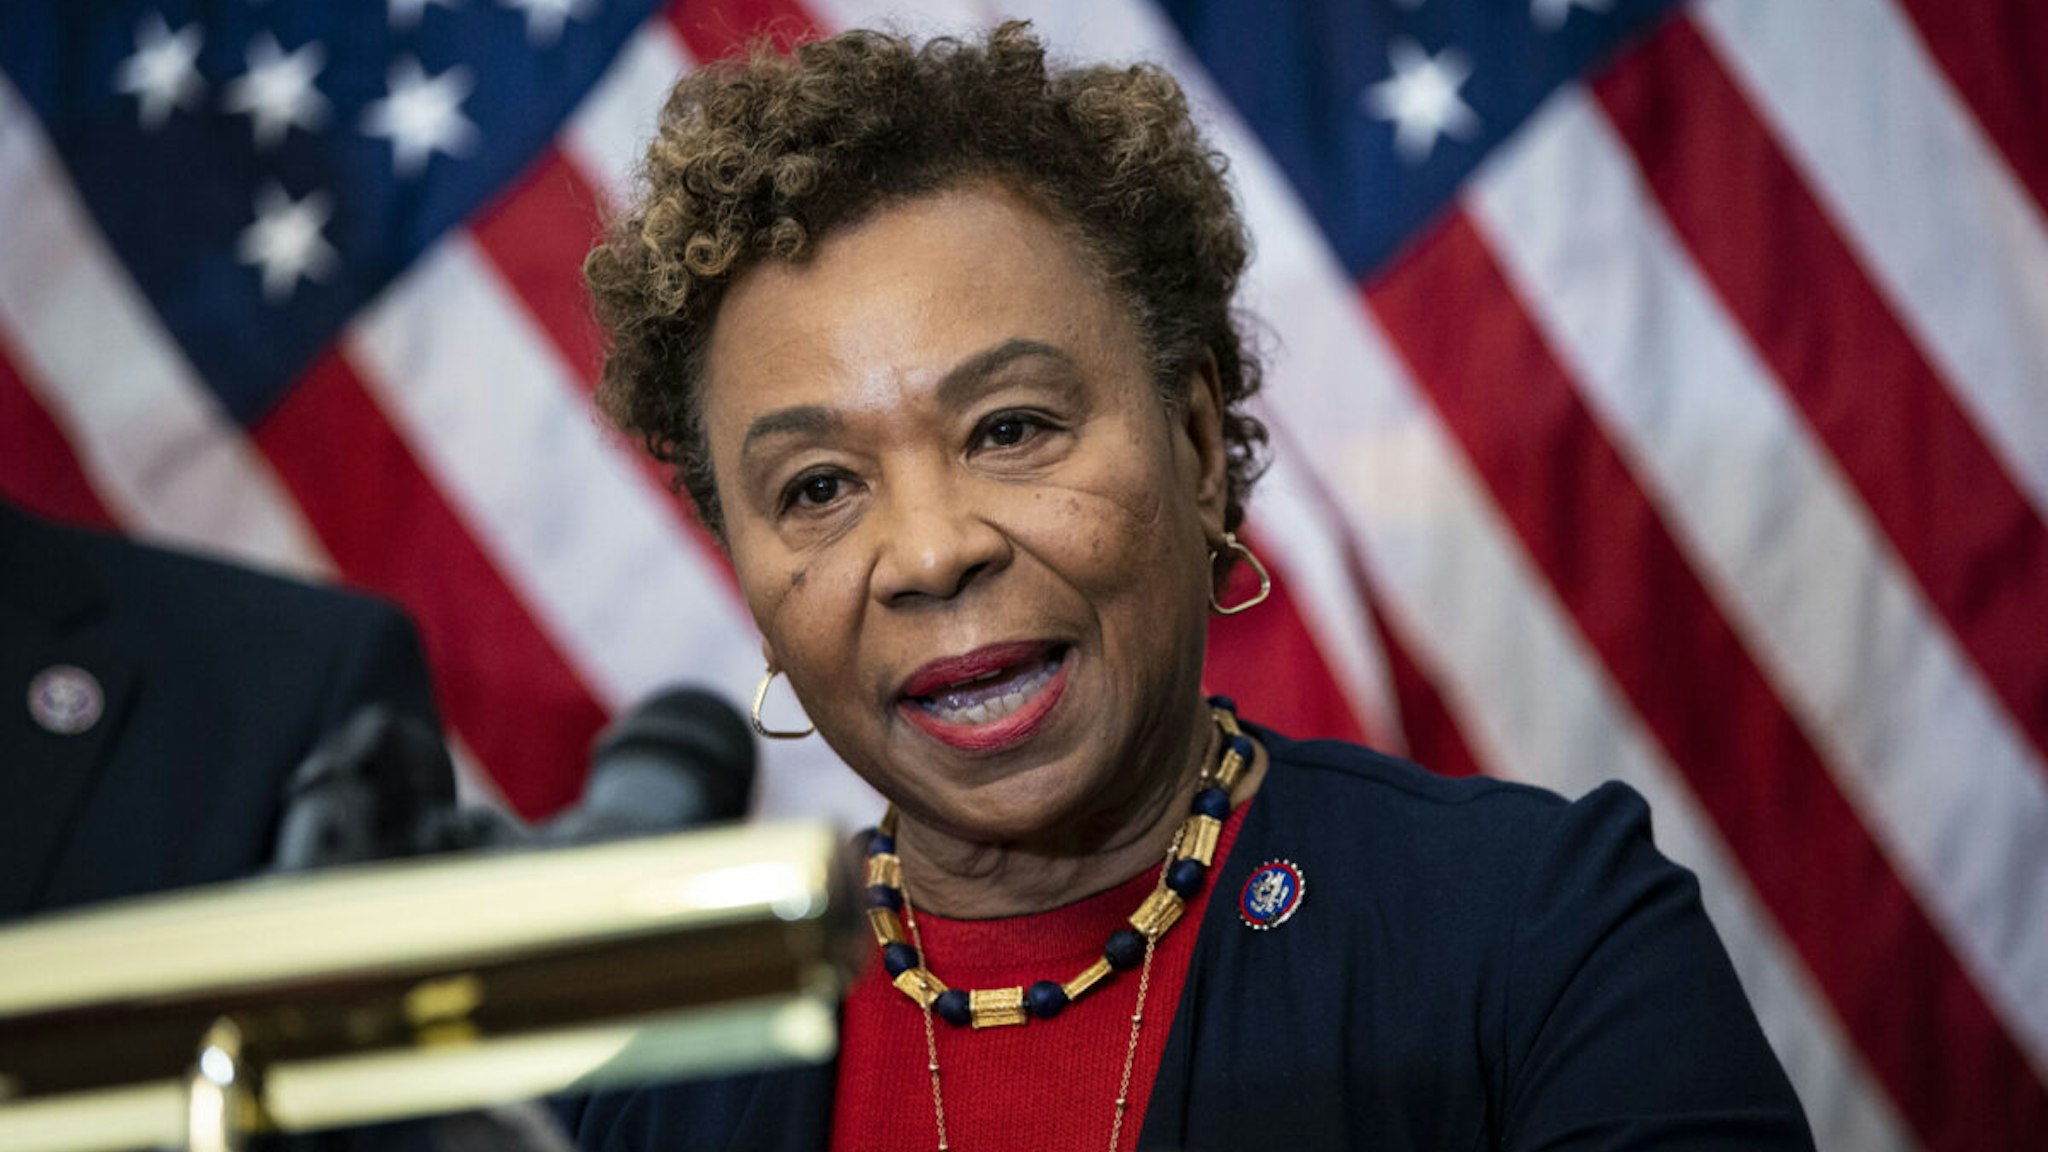 Representative Barbara Lee, a Democrat from California, speaks during a news conference at the U.S. Capitol in Washington, D.C., U.S., on Wednesday, Feb. 23, 2022.